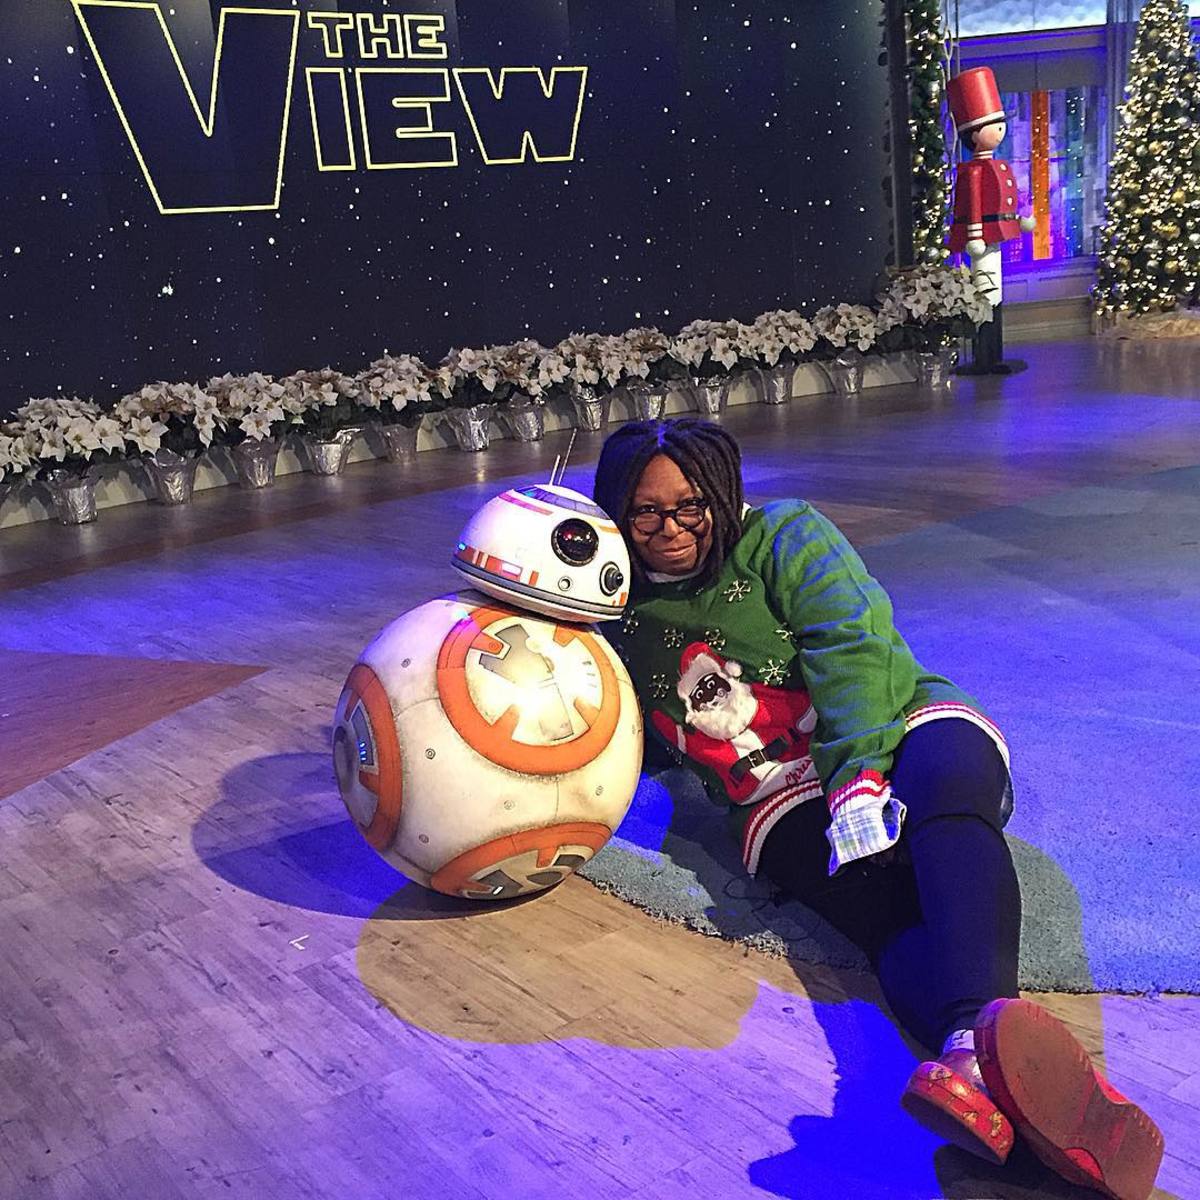 Christmas sweater loyal wearer (not her own design) Whoopi Goldberg on "The View" with BB-8. Photo: Instagram/@theviewabc